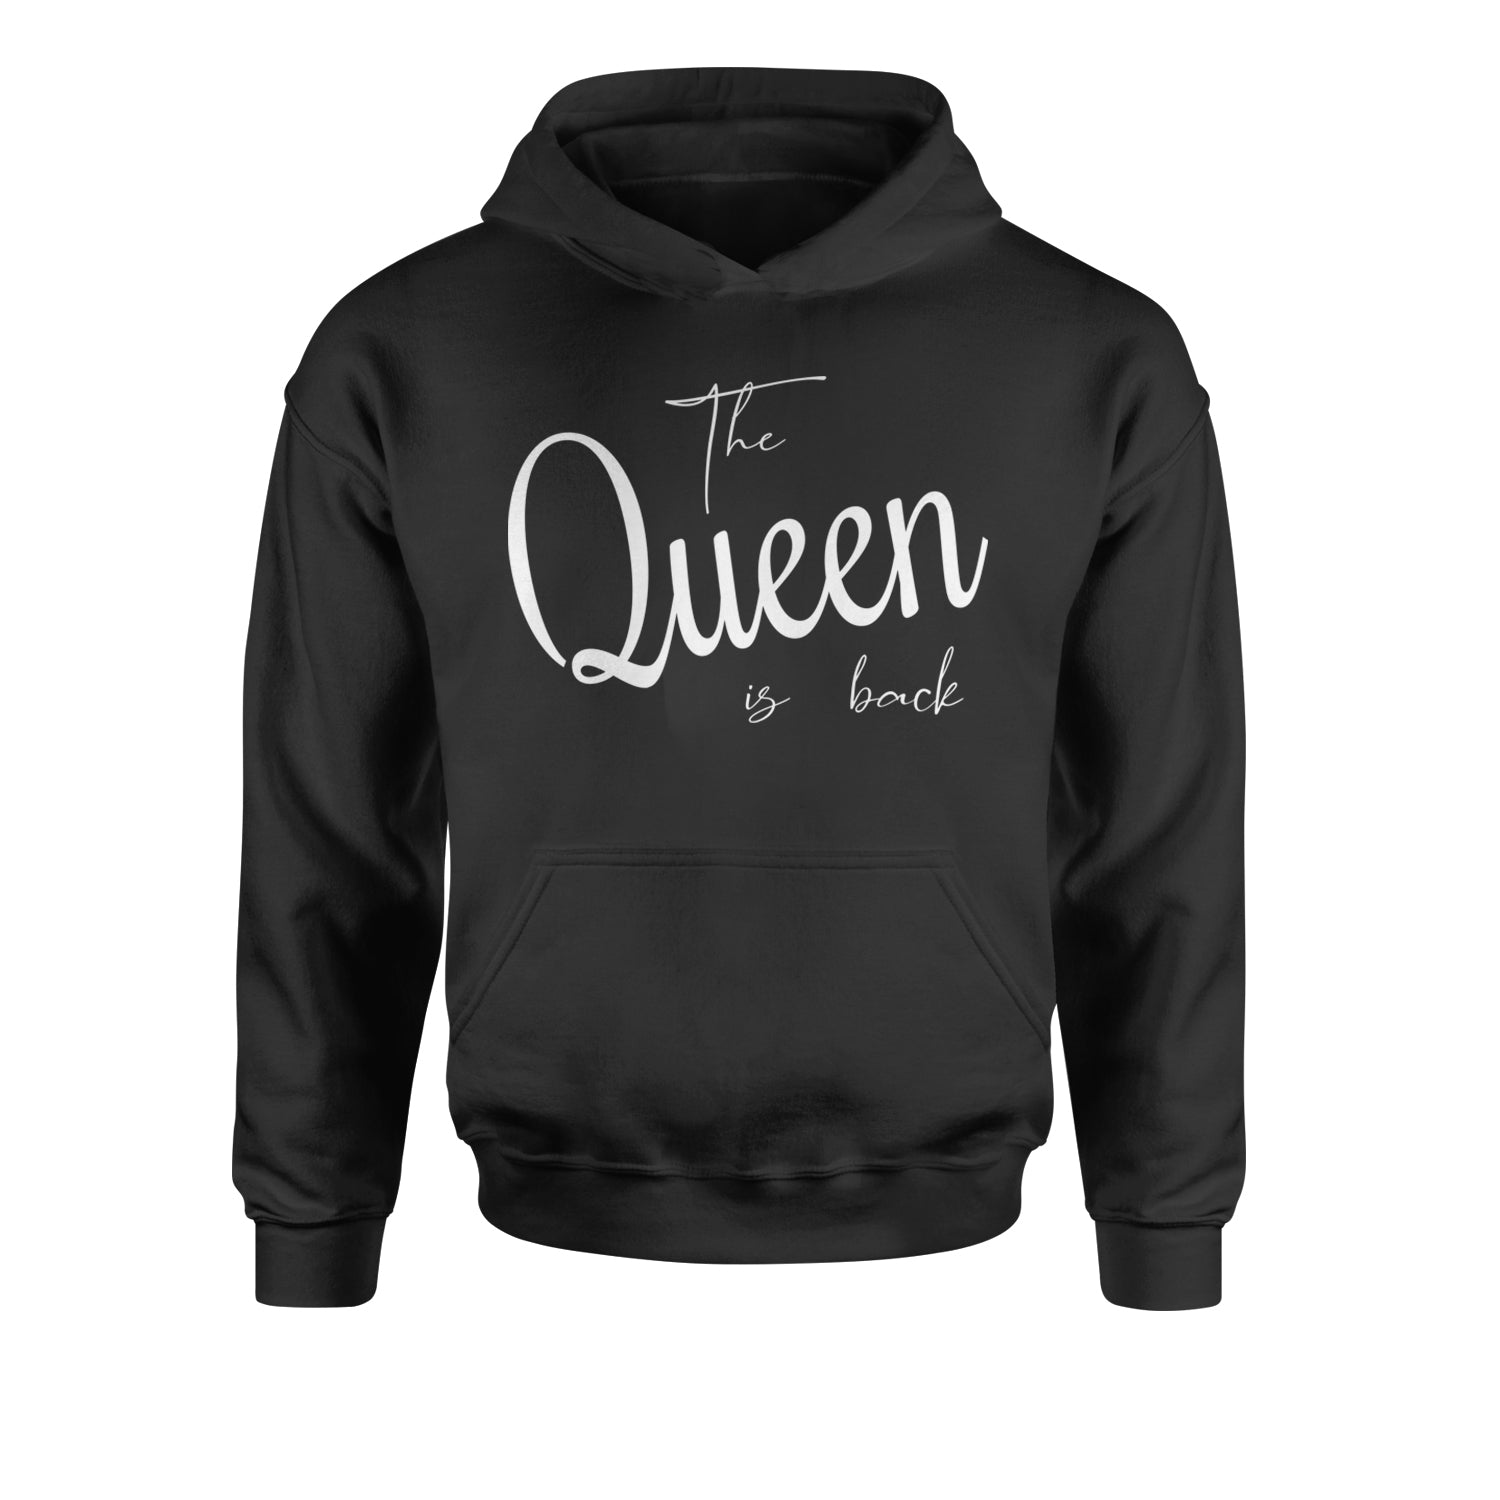 The Queen Is Back Celebration Youth-Sized Hoodie